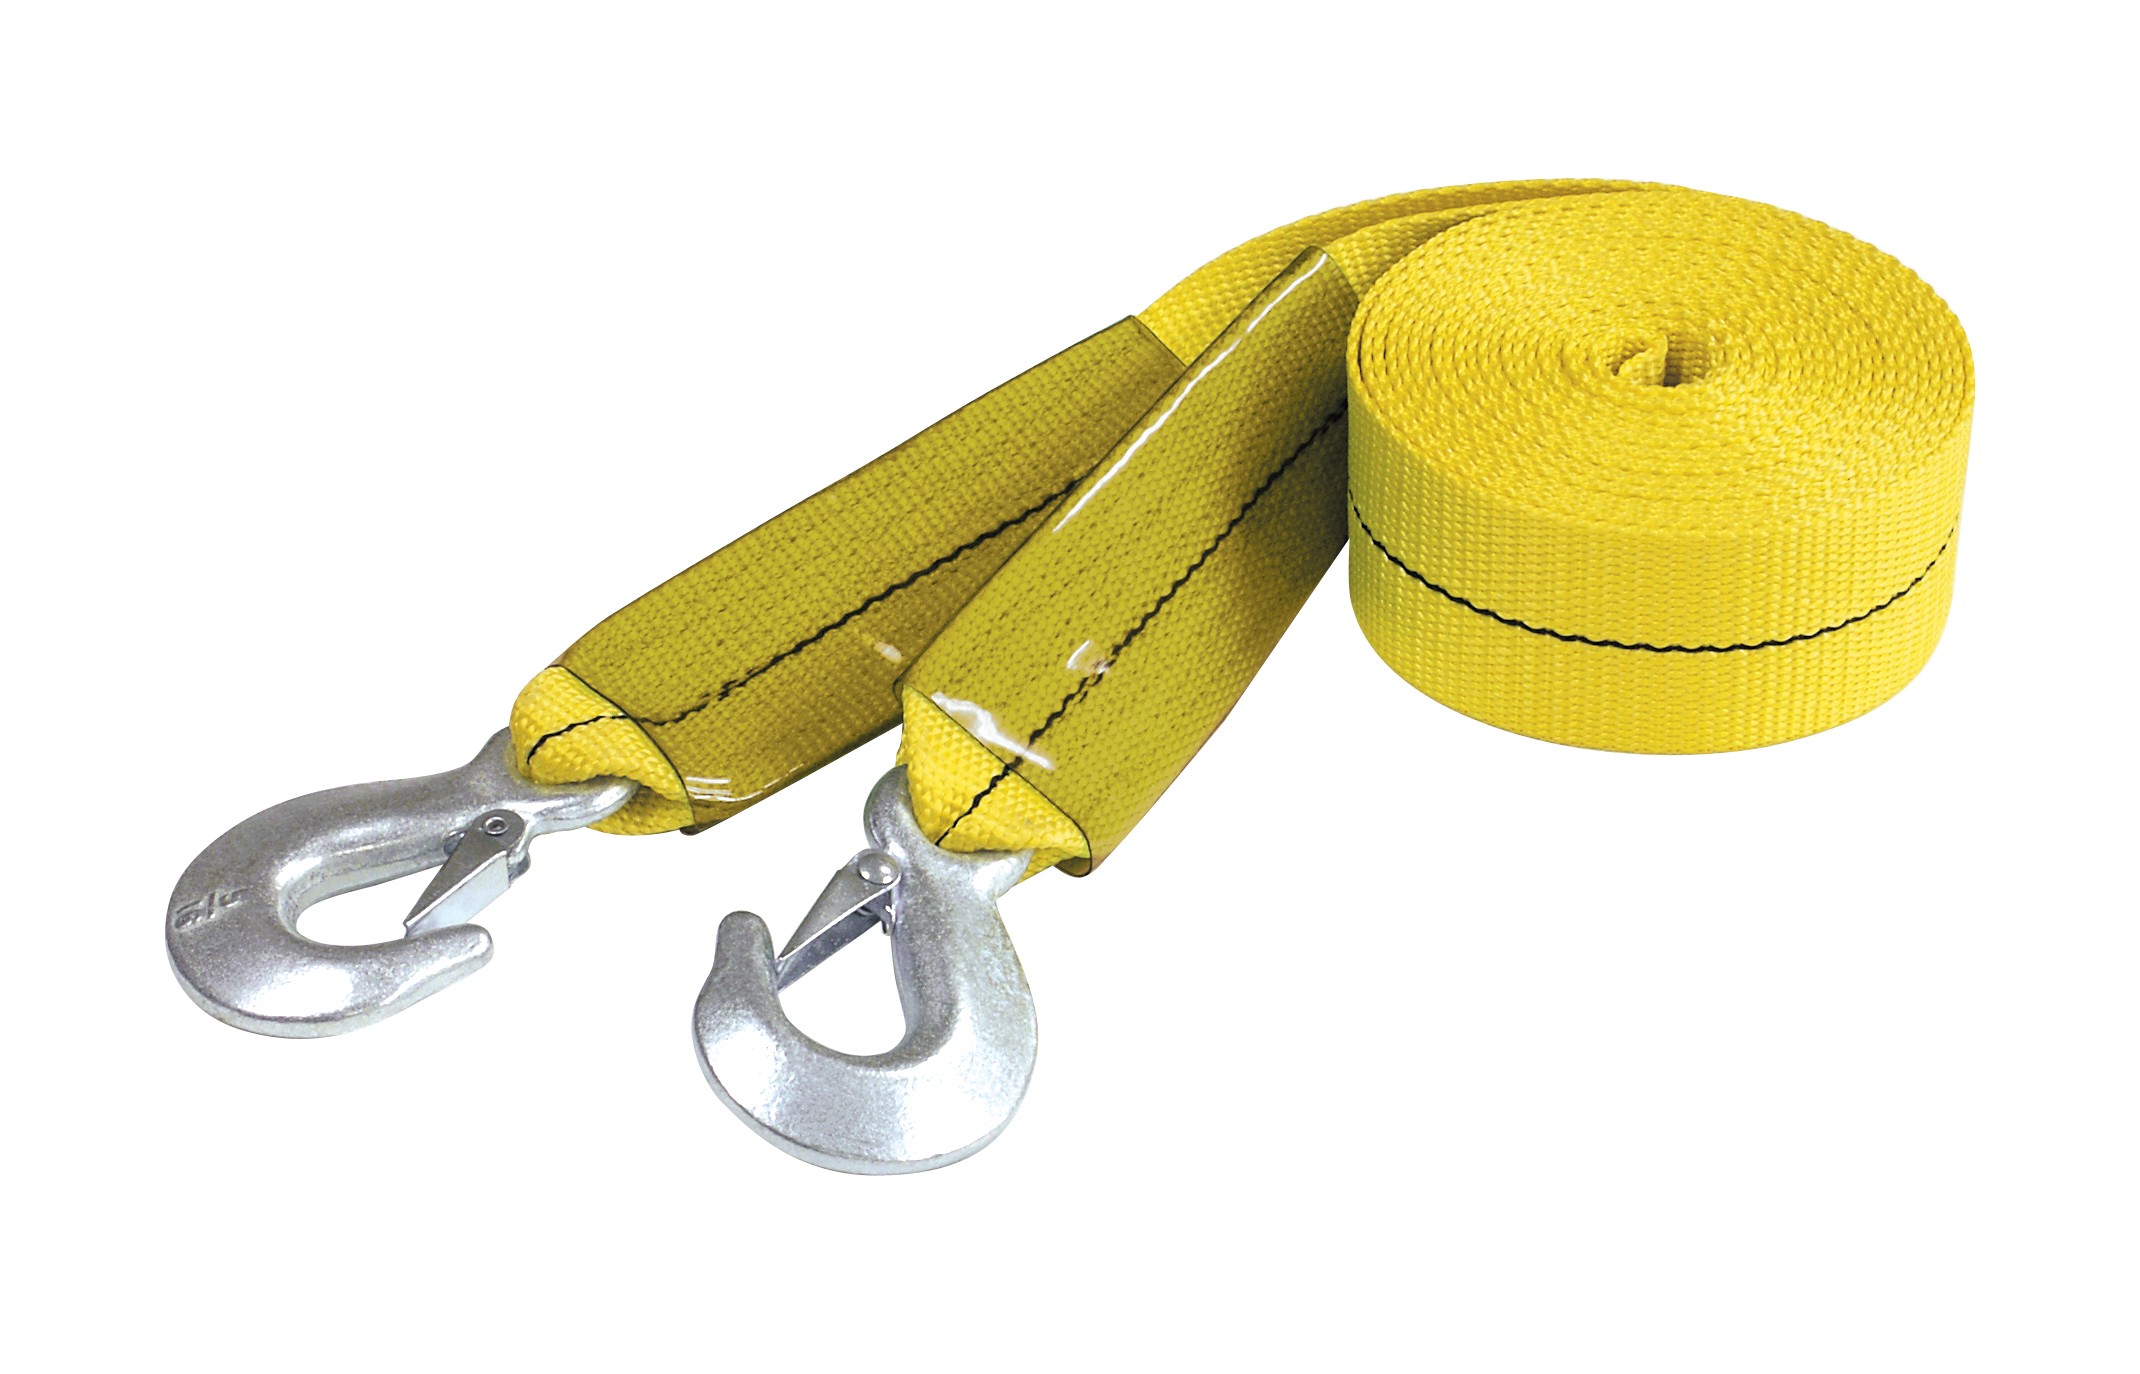 6015 20 ft x 2 1/4" Wide Flat Tow Strap